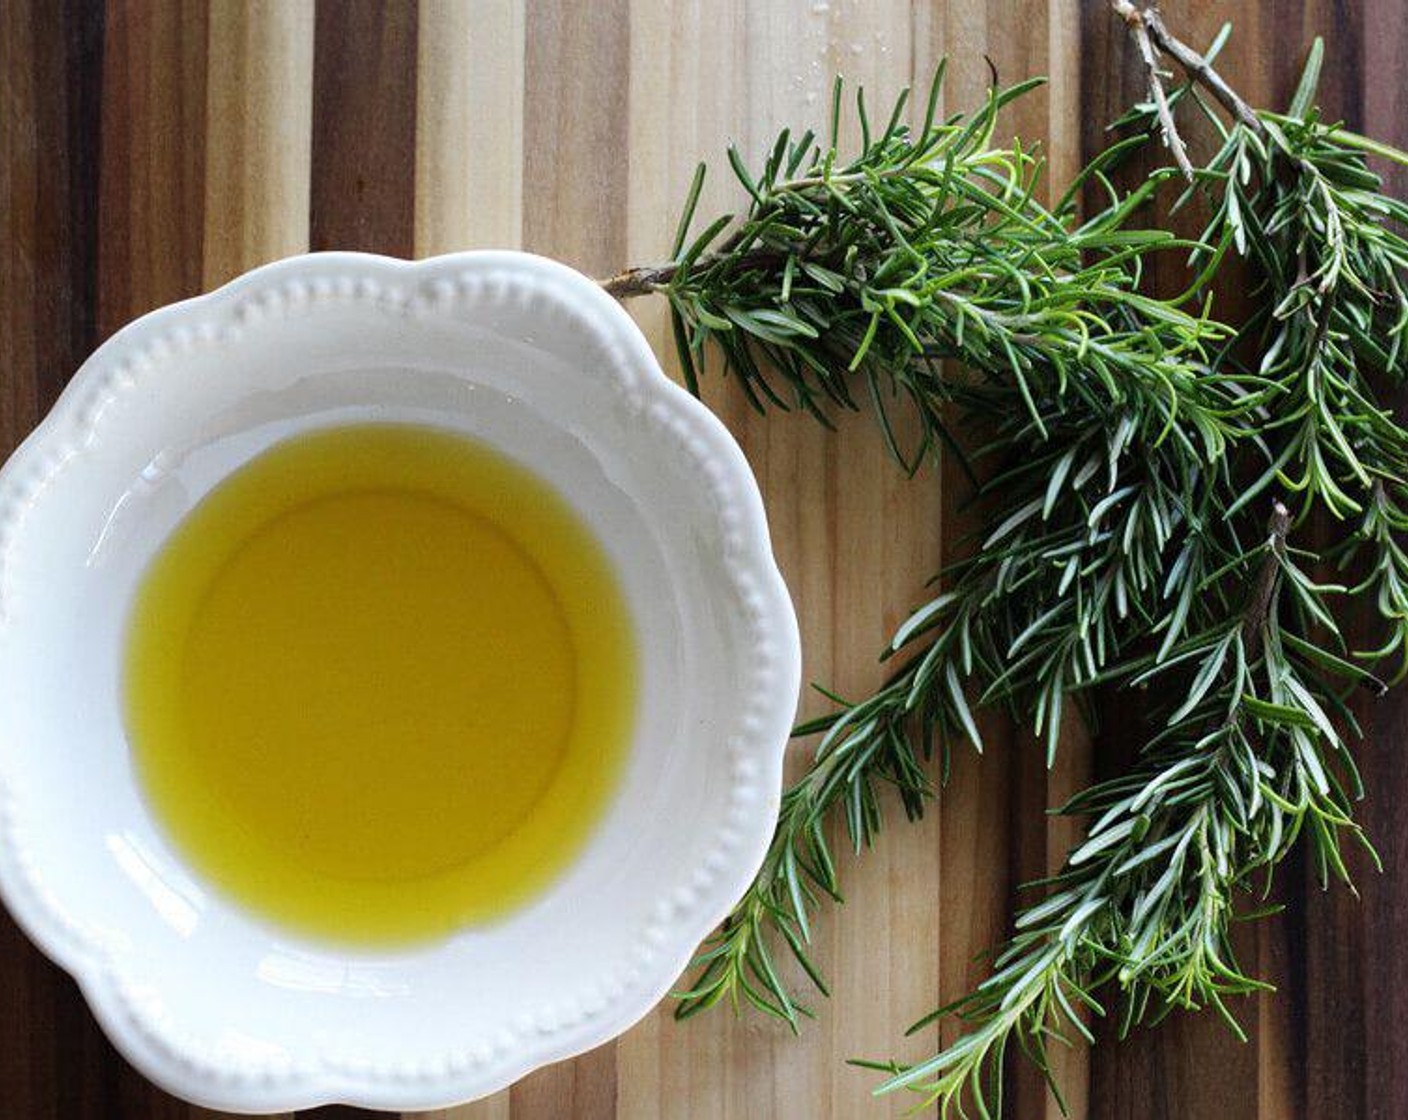 step 3 Combine the Rosemary Leaves (1/2 cup) and Extra-Virgin Olive Oil (1/4 cup) in a small bowl.